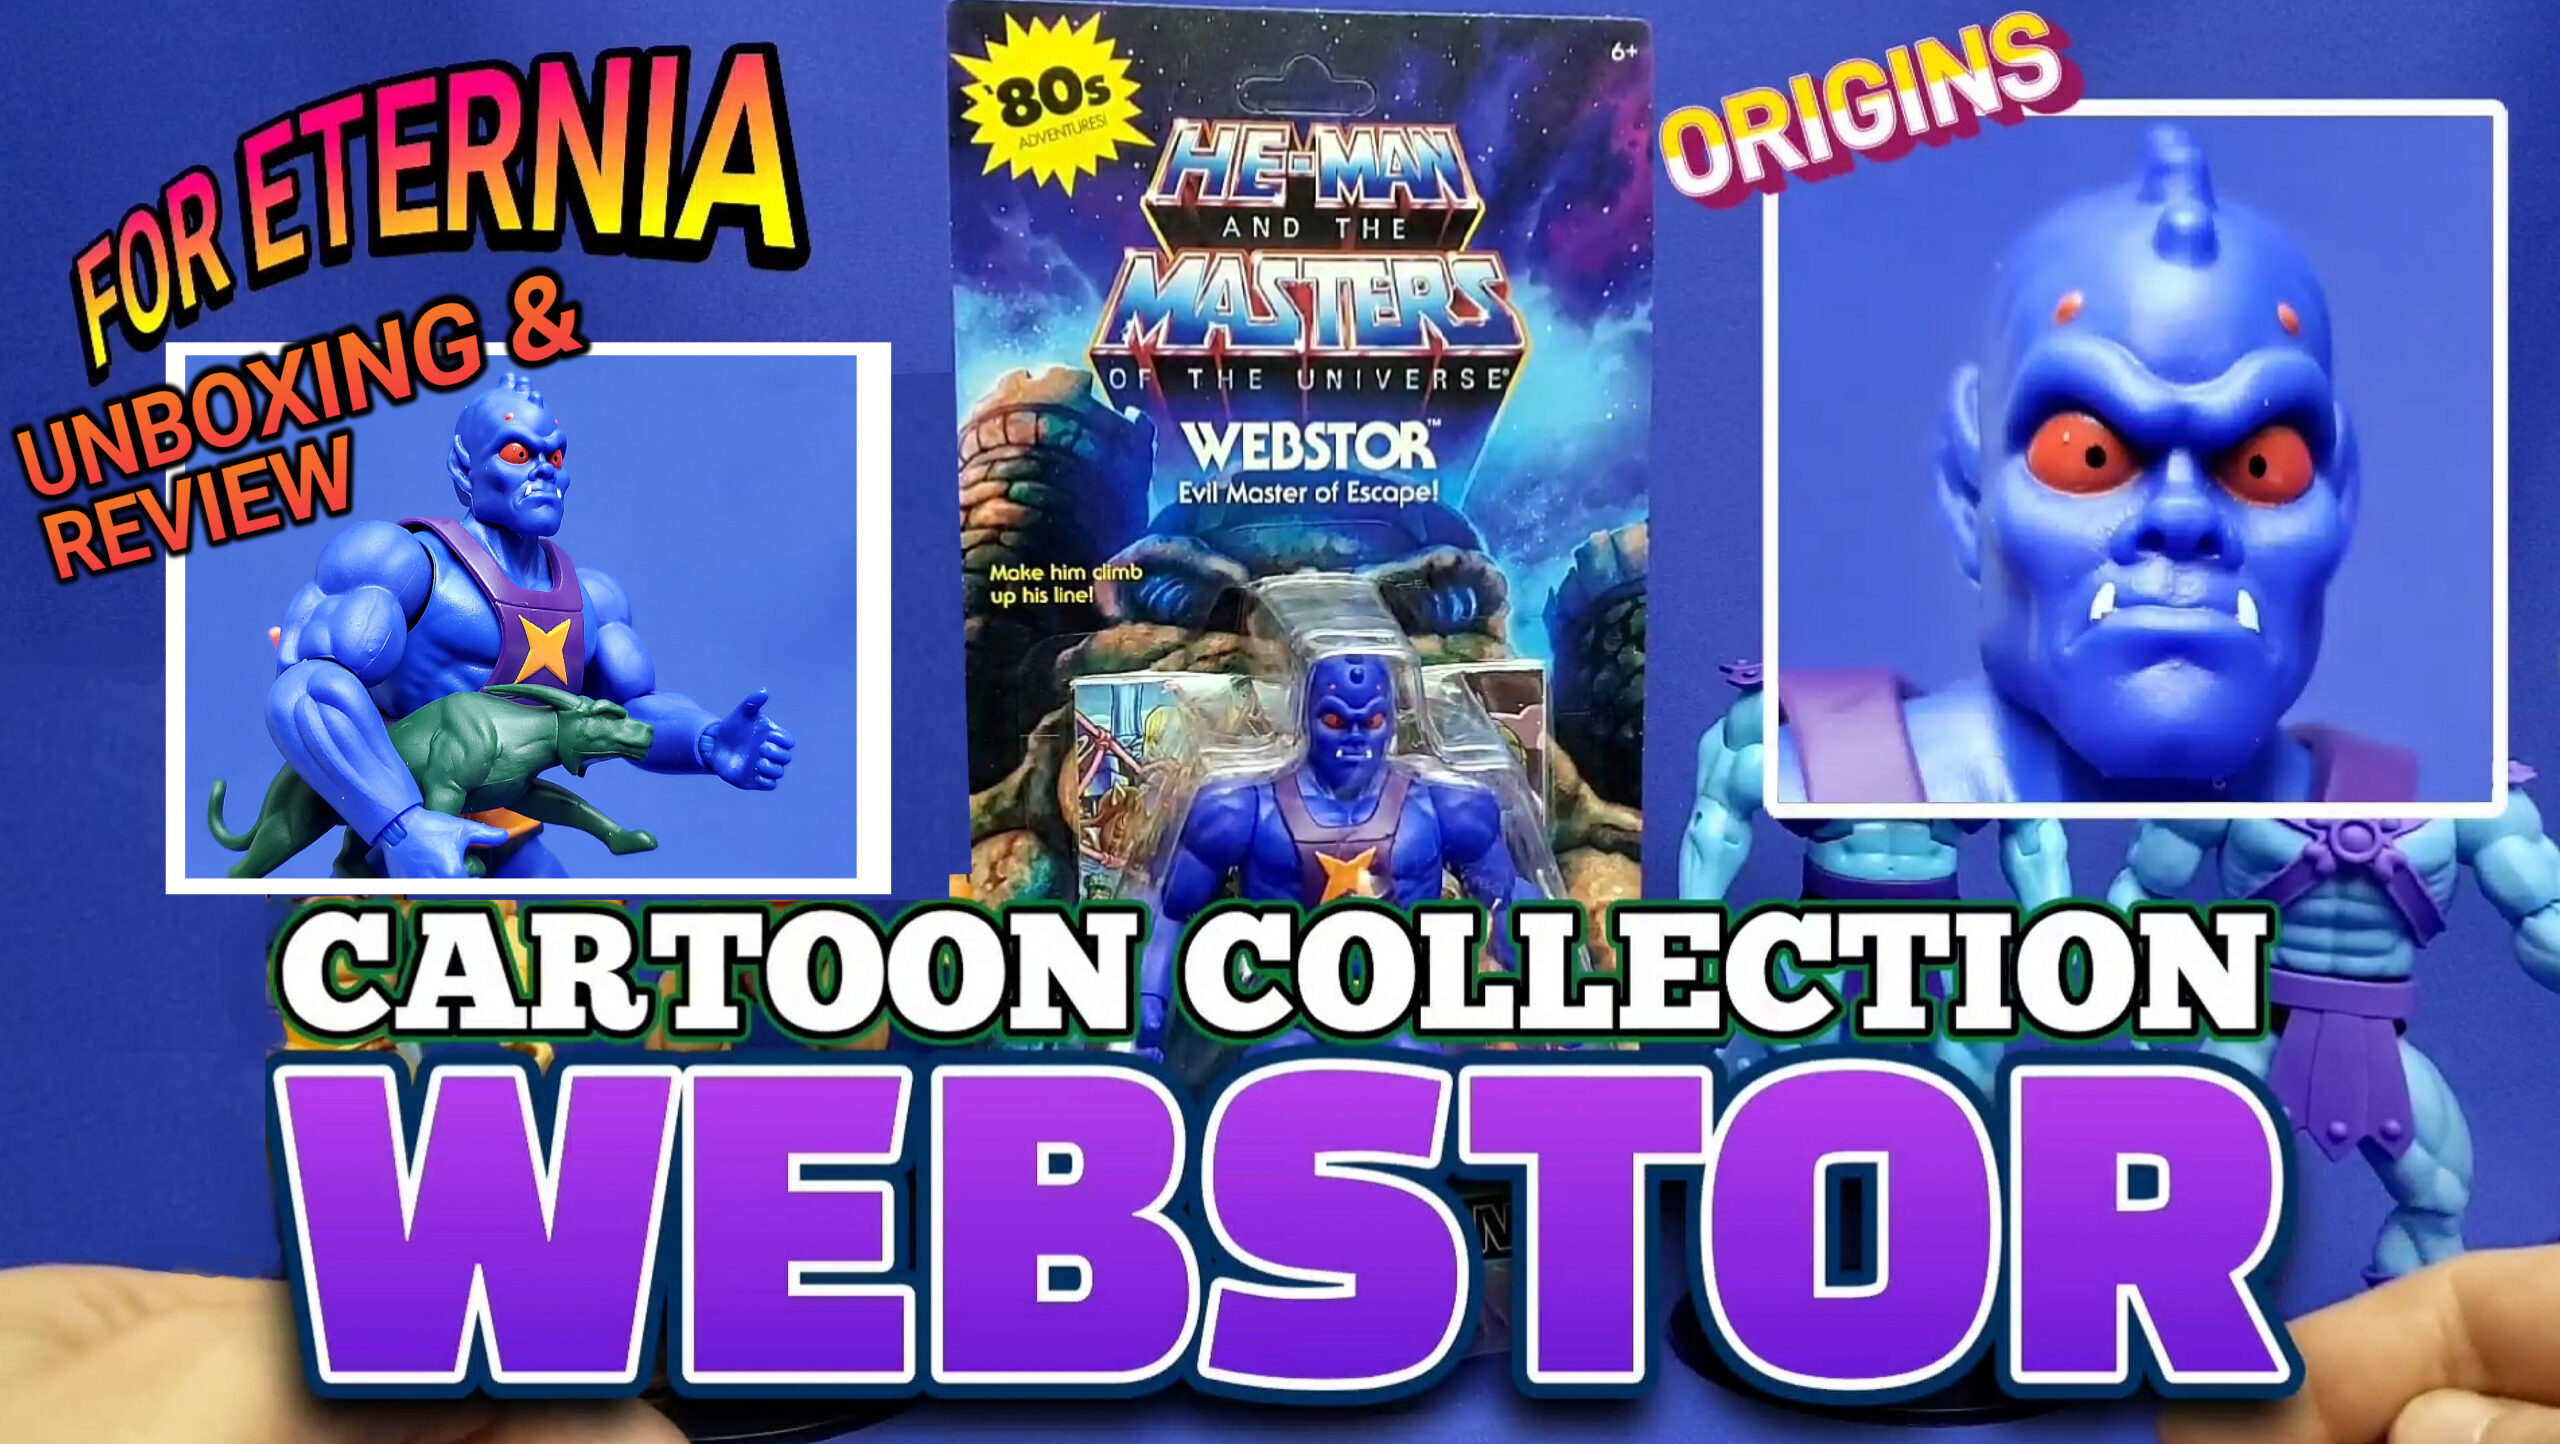 UNBOXING & REVIEW Origins ”Cartoon Collection” WEBSTOR He-Man and the Masters of the Universe Action Figure